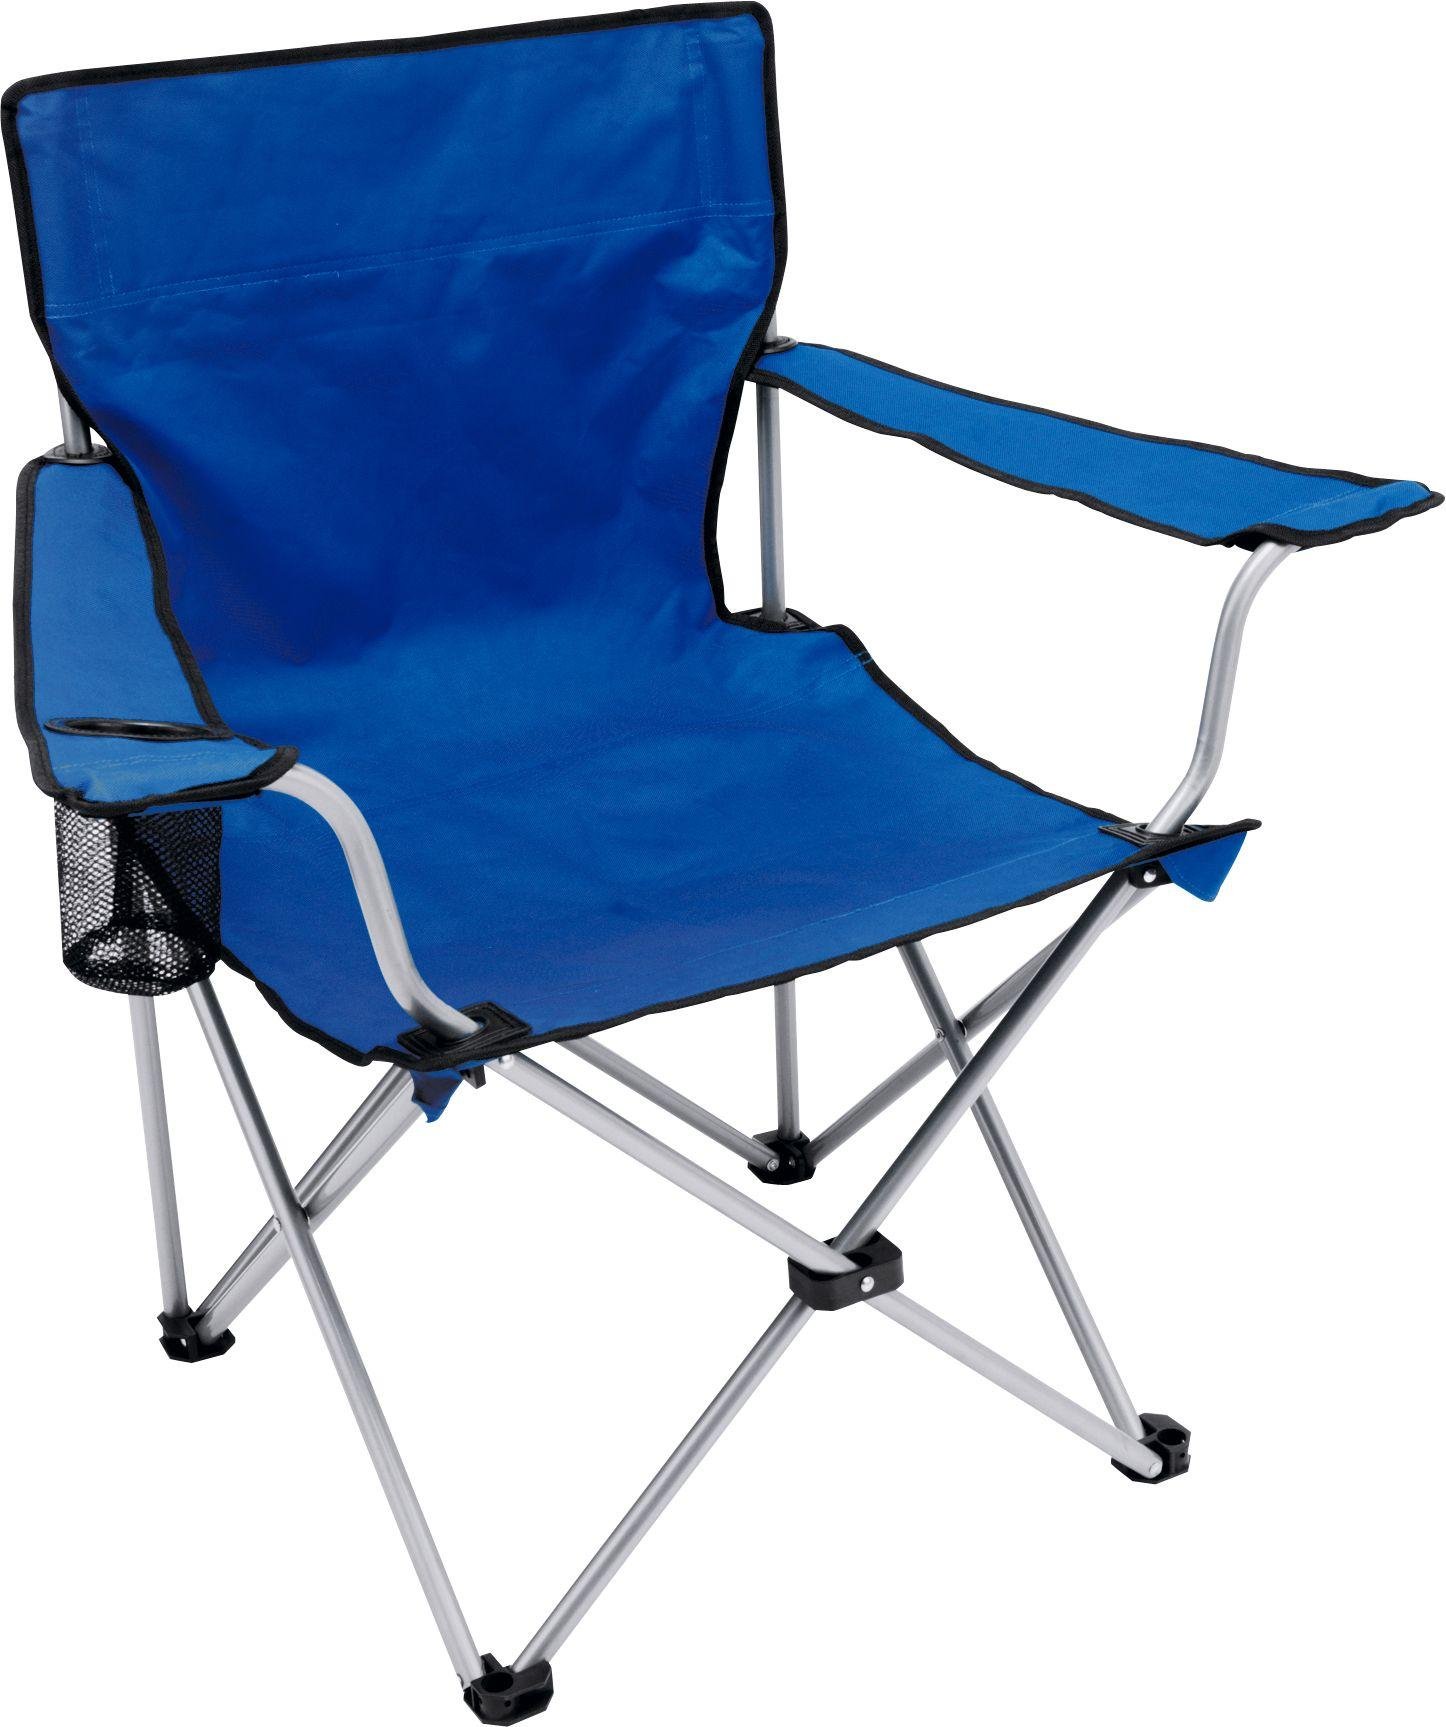 folding camping chairs steel folding camping chair CVLTYEW